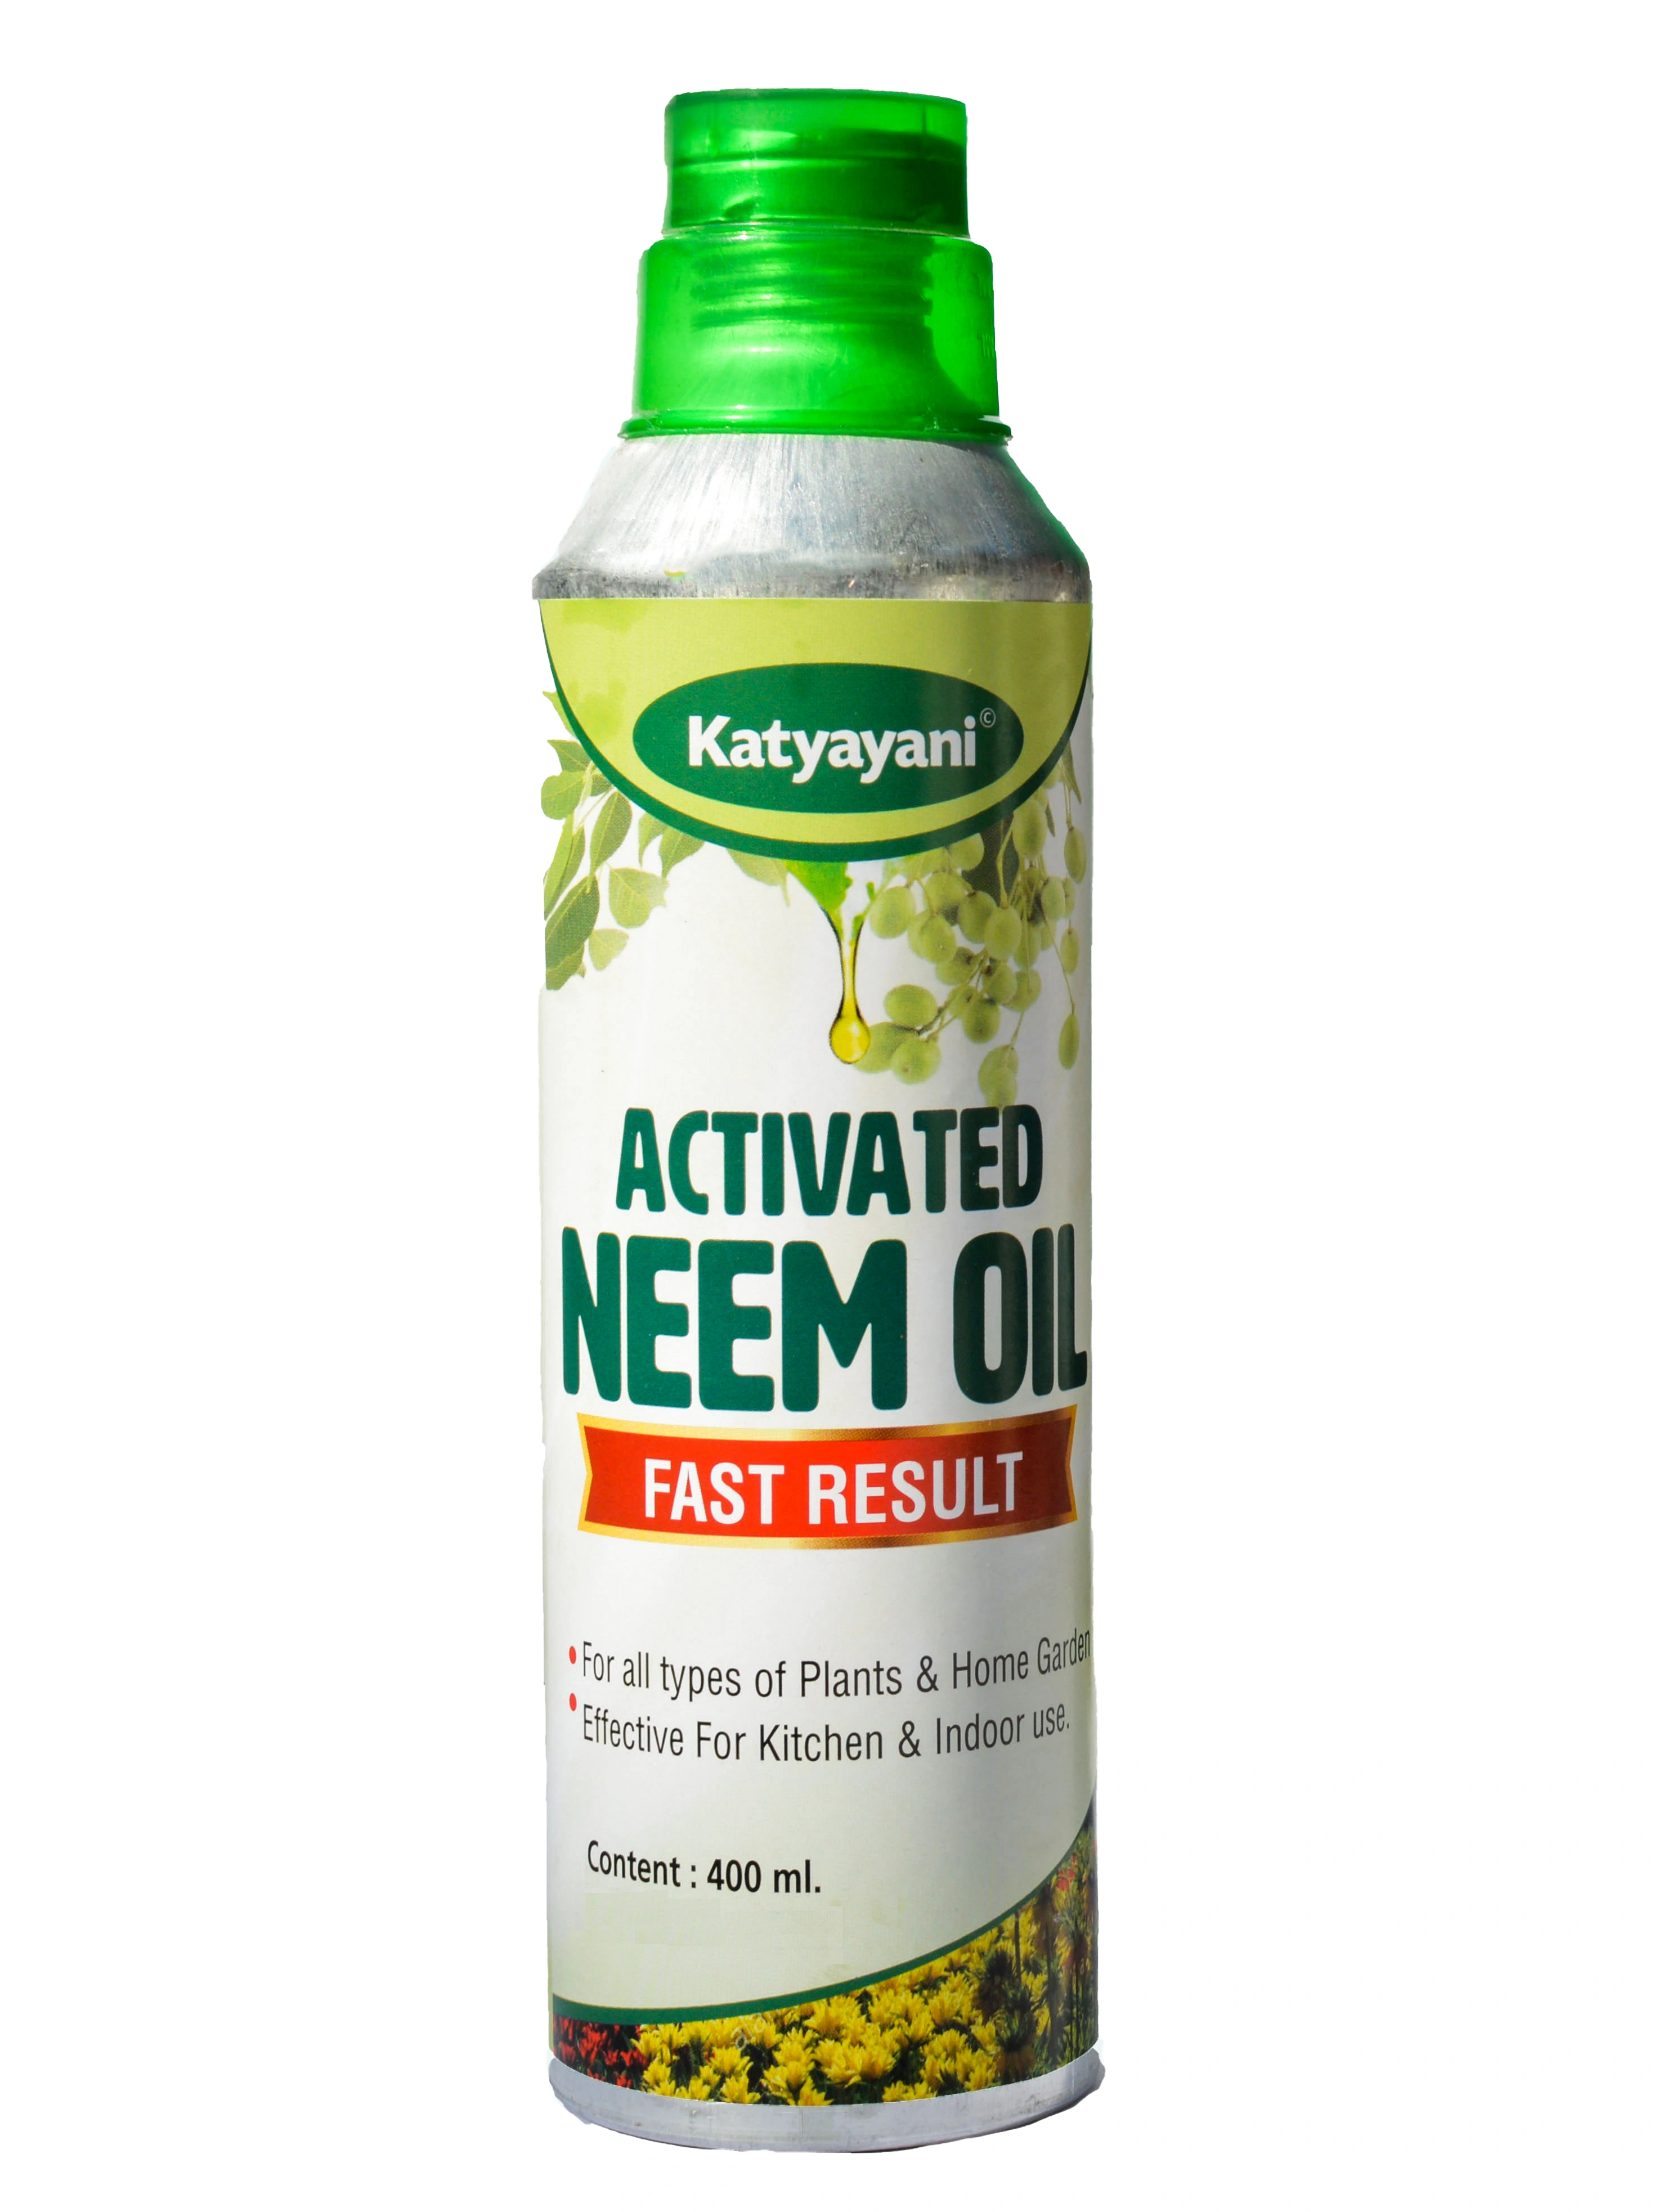 Katyayani Activated Neem Oil for Plants Garden Kitchen Insect Spray Pest Control Organic Azadirachtin Pesticide Fast Results-11375982